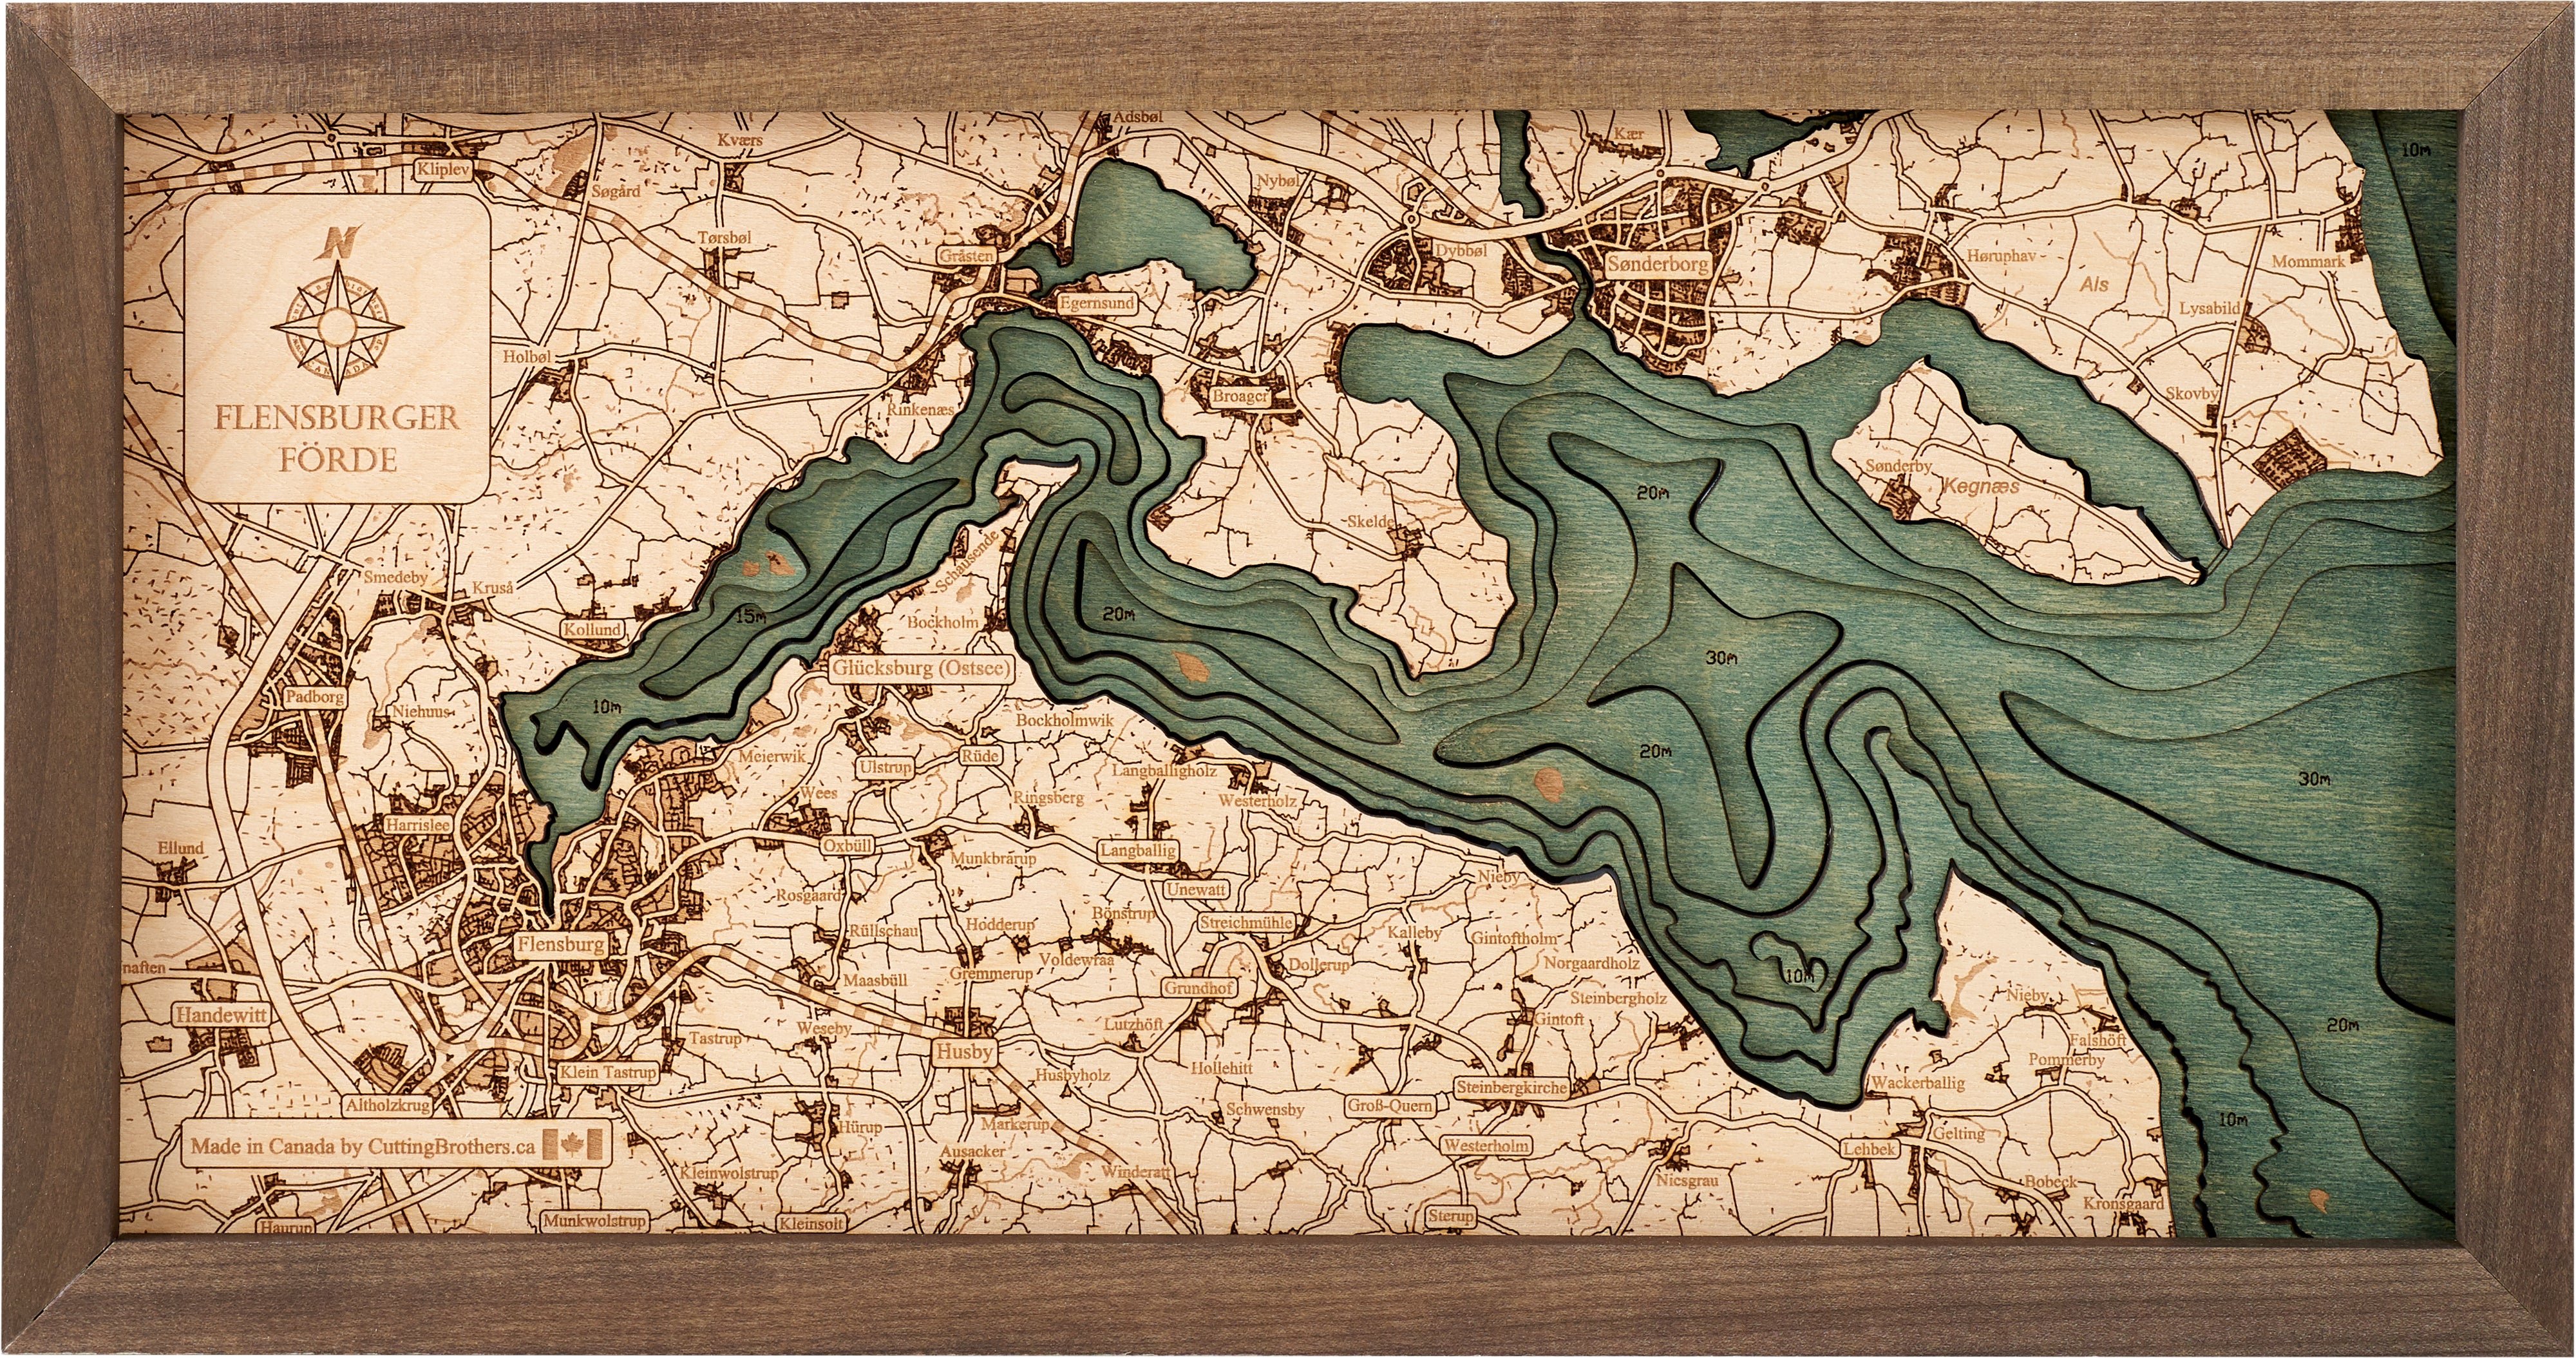 FLENSBURG FJORD 3D wooden wall map - version S 